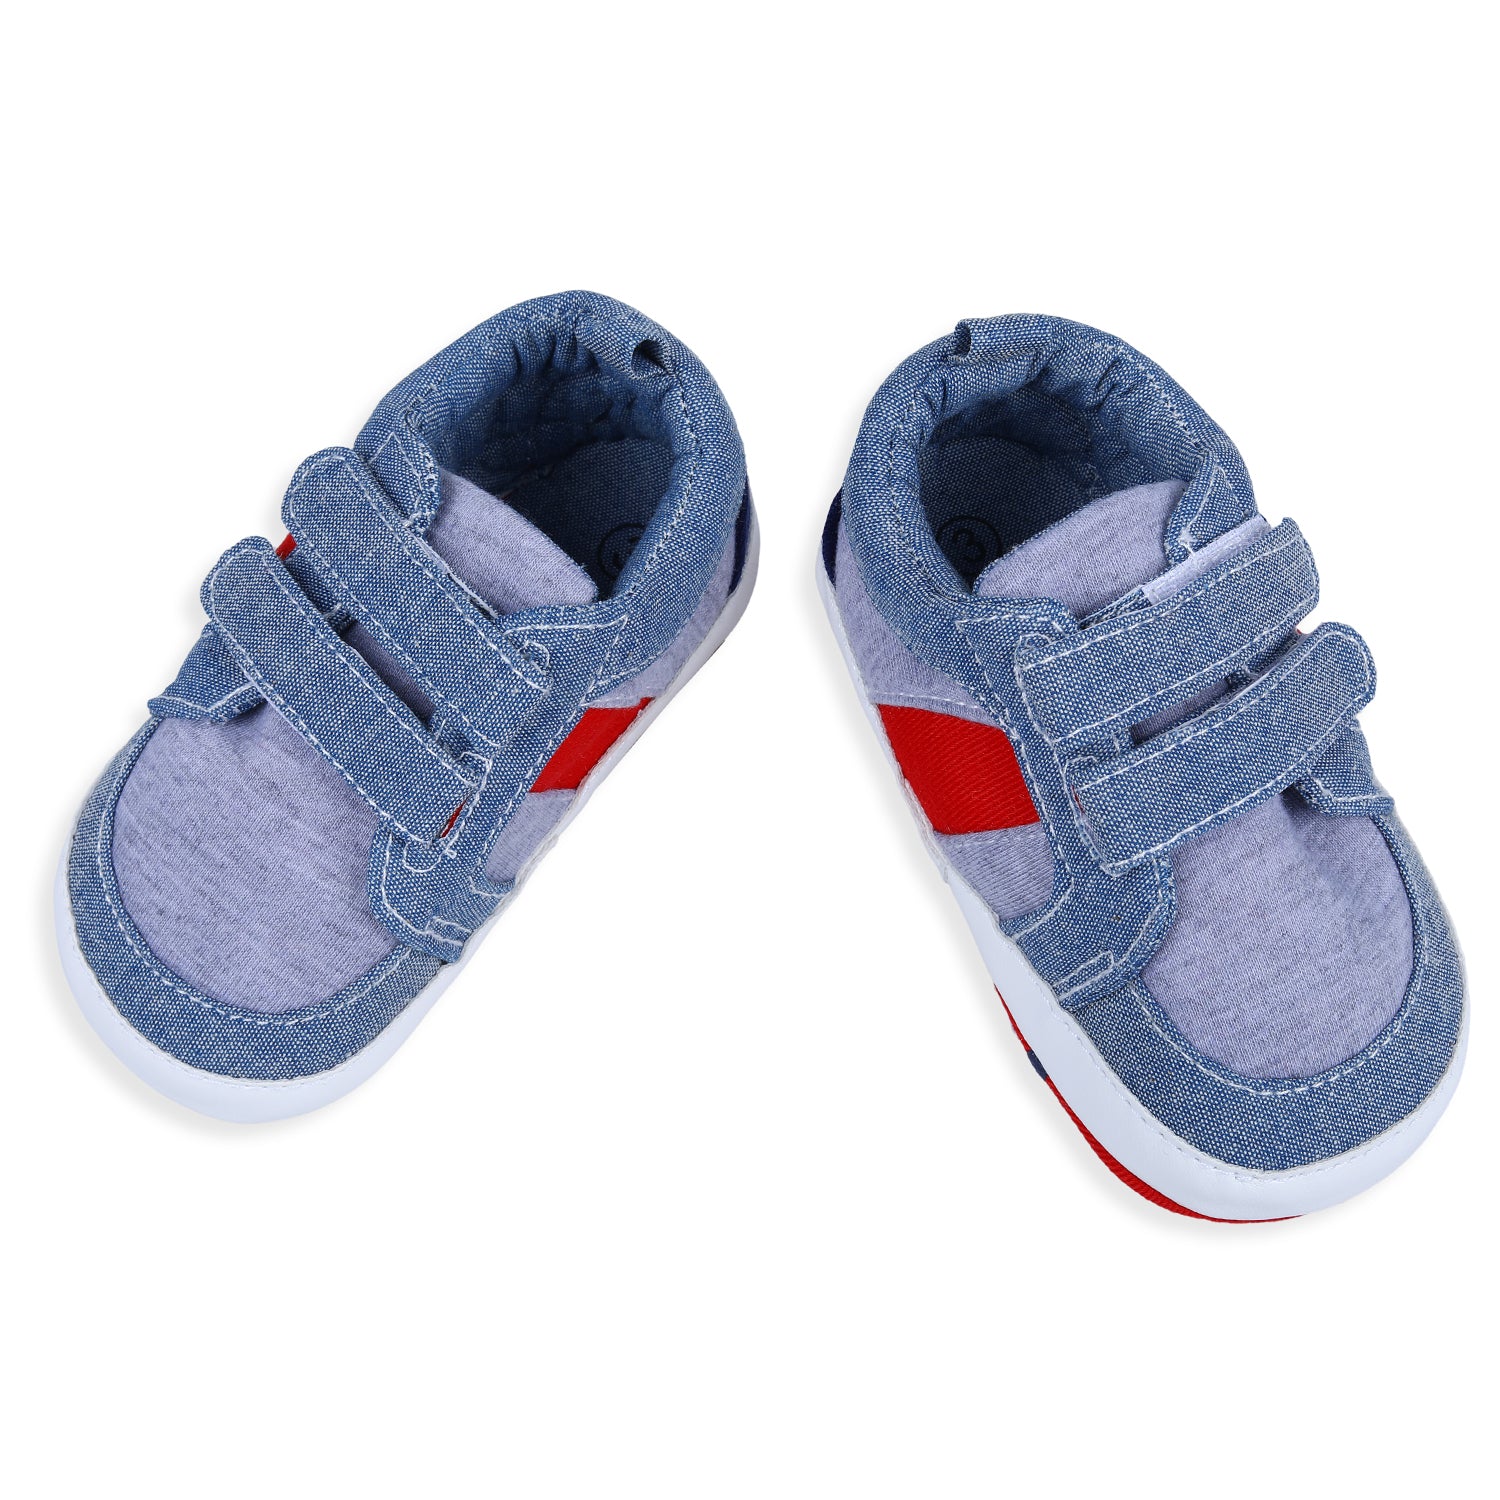 Colour Blocked Cute And Casual Denim Velcro Booties - Blue And Red